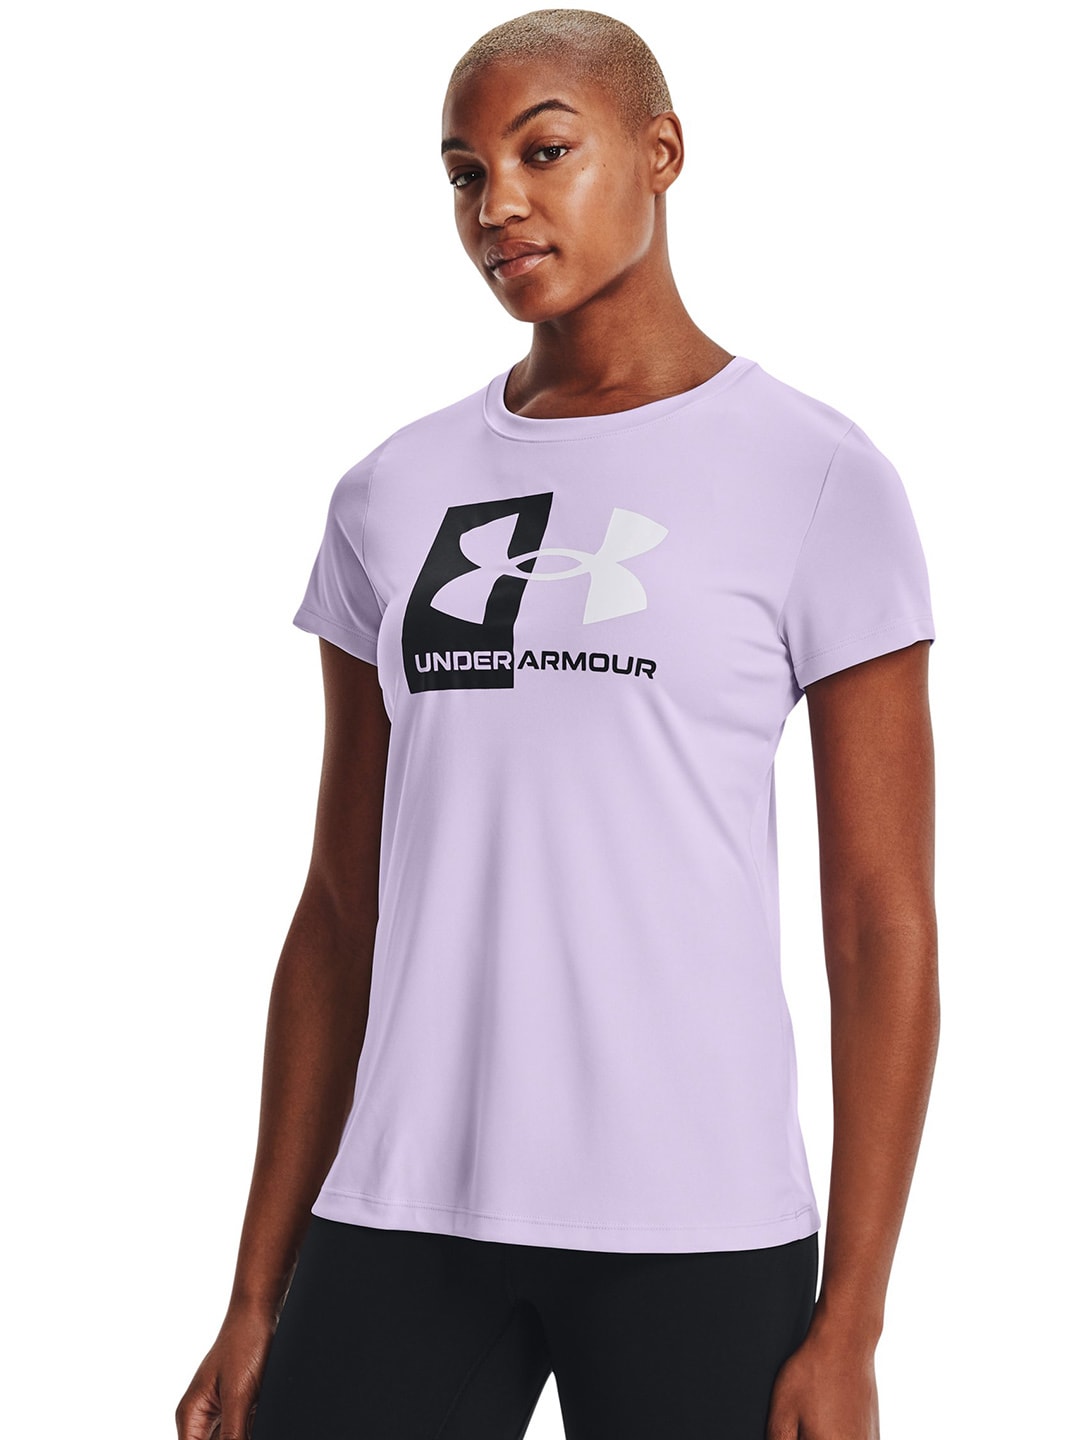 UNDER ARMOUR Women Lavender Velocity Logo SSC Brand Logo Printed Loose T-shirt Price in India